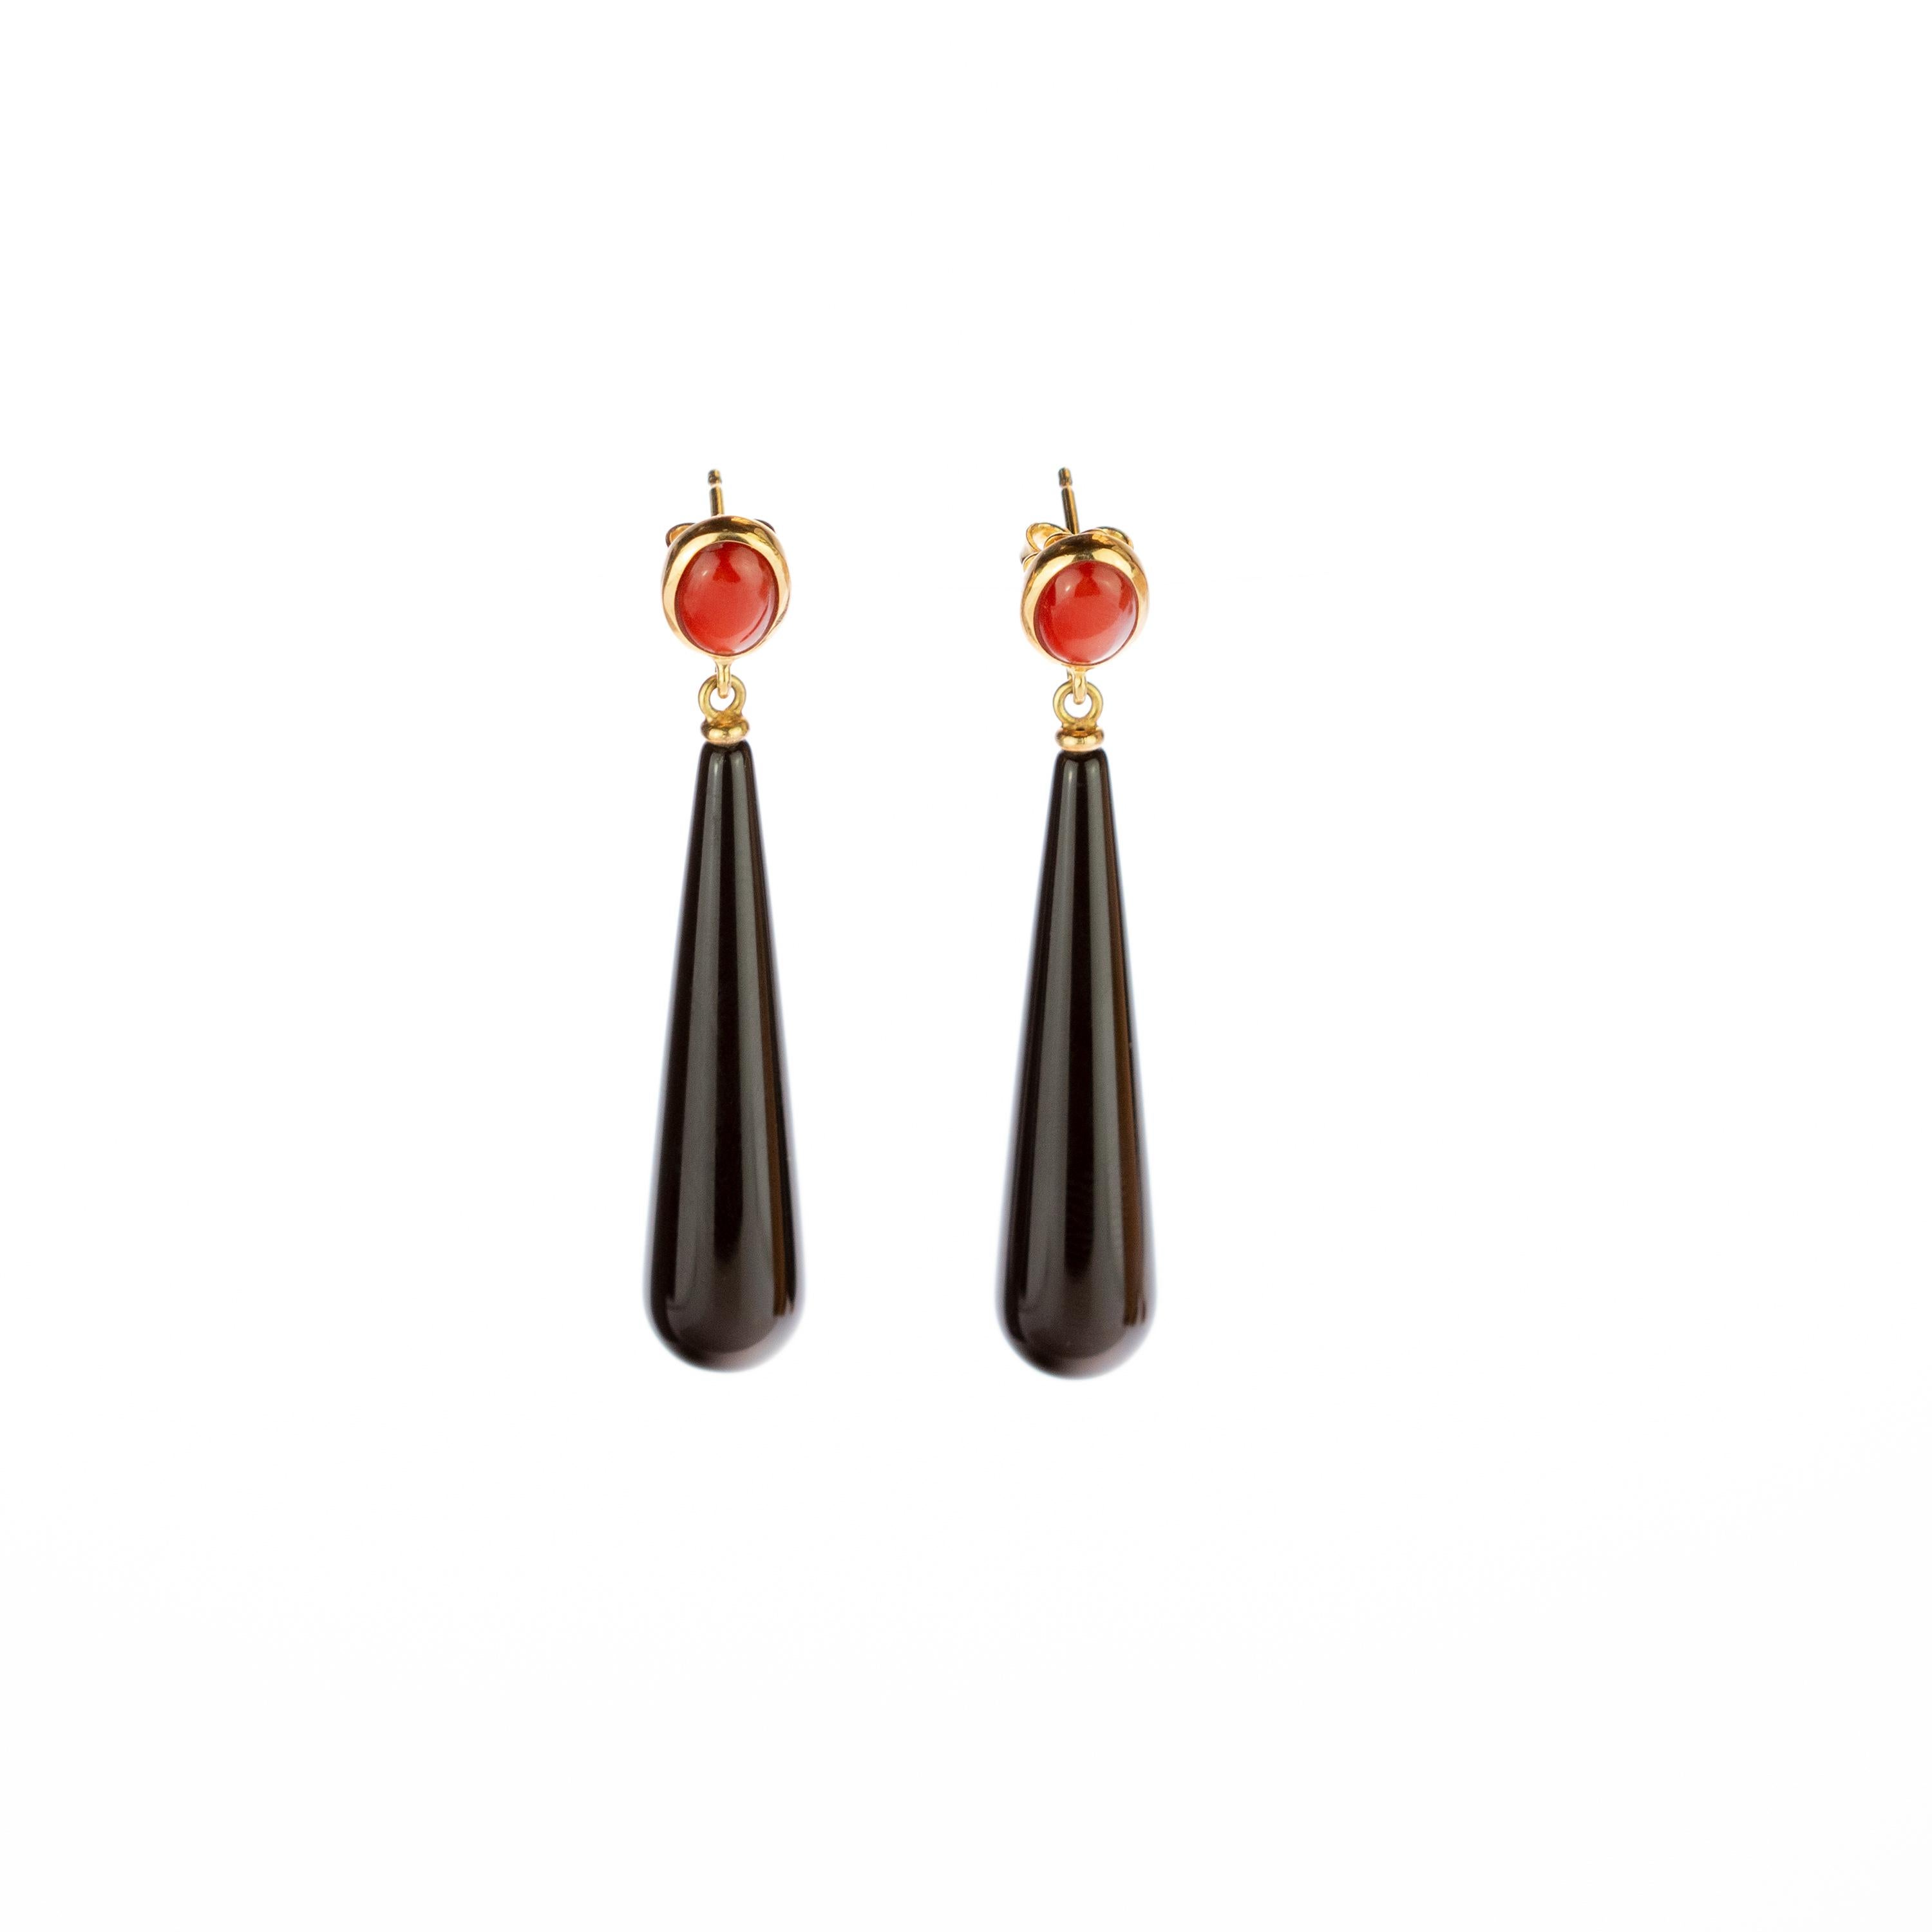 At the Intini Jewels workshop we created stunning red coral and black agate drop earrings holded by delicate 18 karat white gold details. Unique masterpiece with an outstanding display of color and a high quality craftsmanship that evokes a fancy